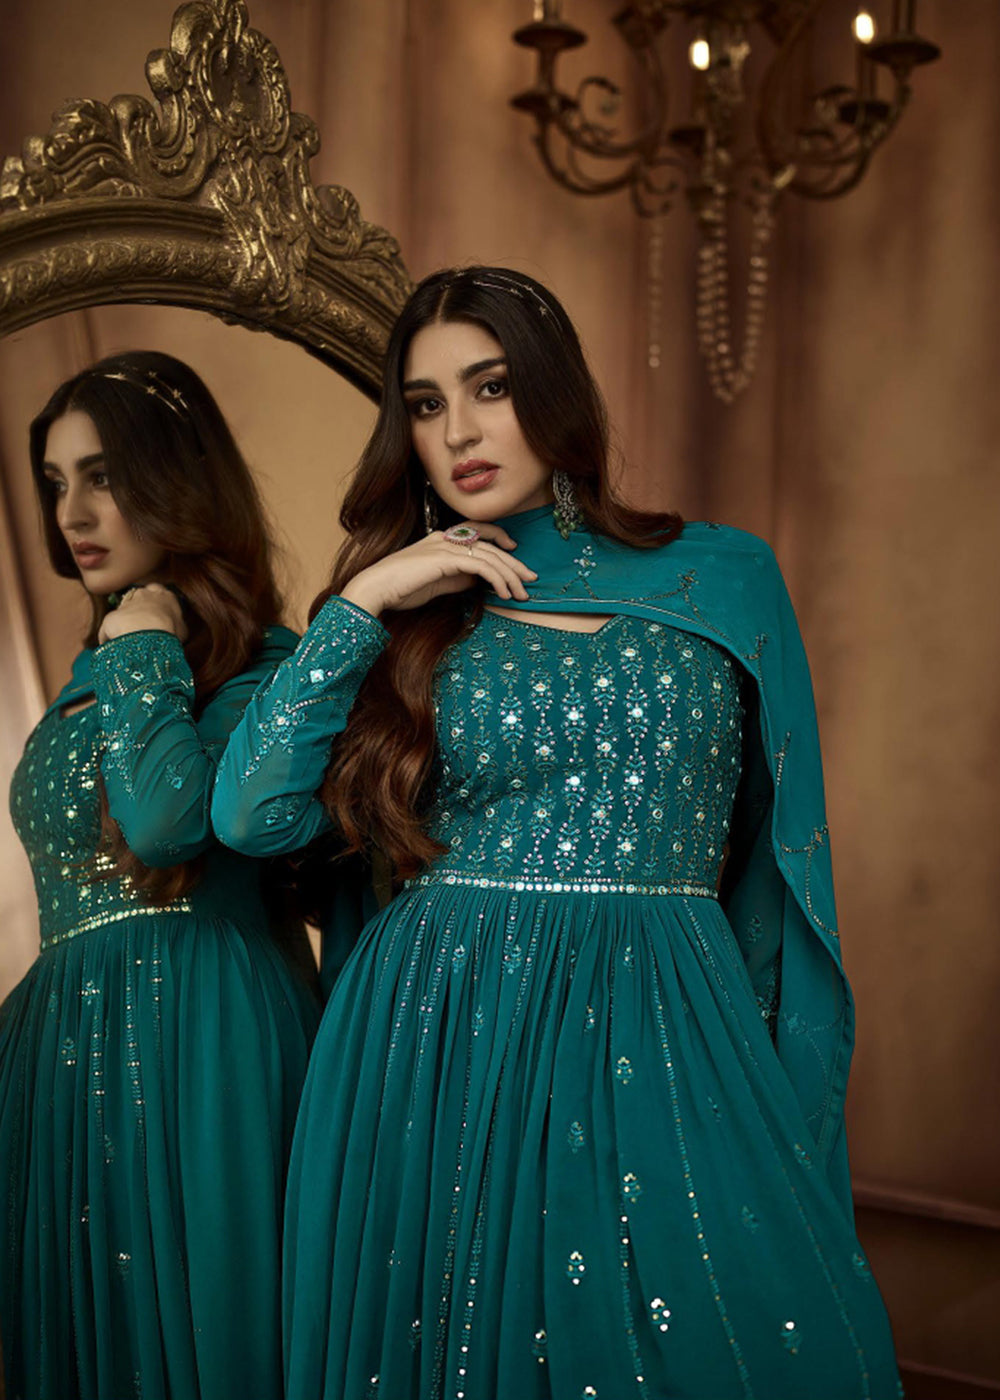 Buy Now Beauteous Teal Green Sequins Wedding Festive Anarkali Suit Online in USA, UK, Australia, New Zealand, Canada & Worldwide at Empress Clothing.